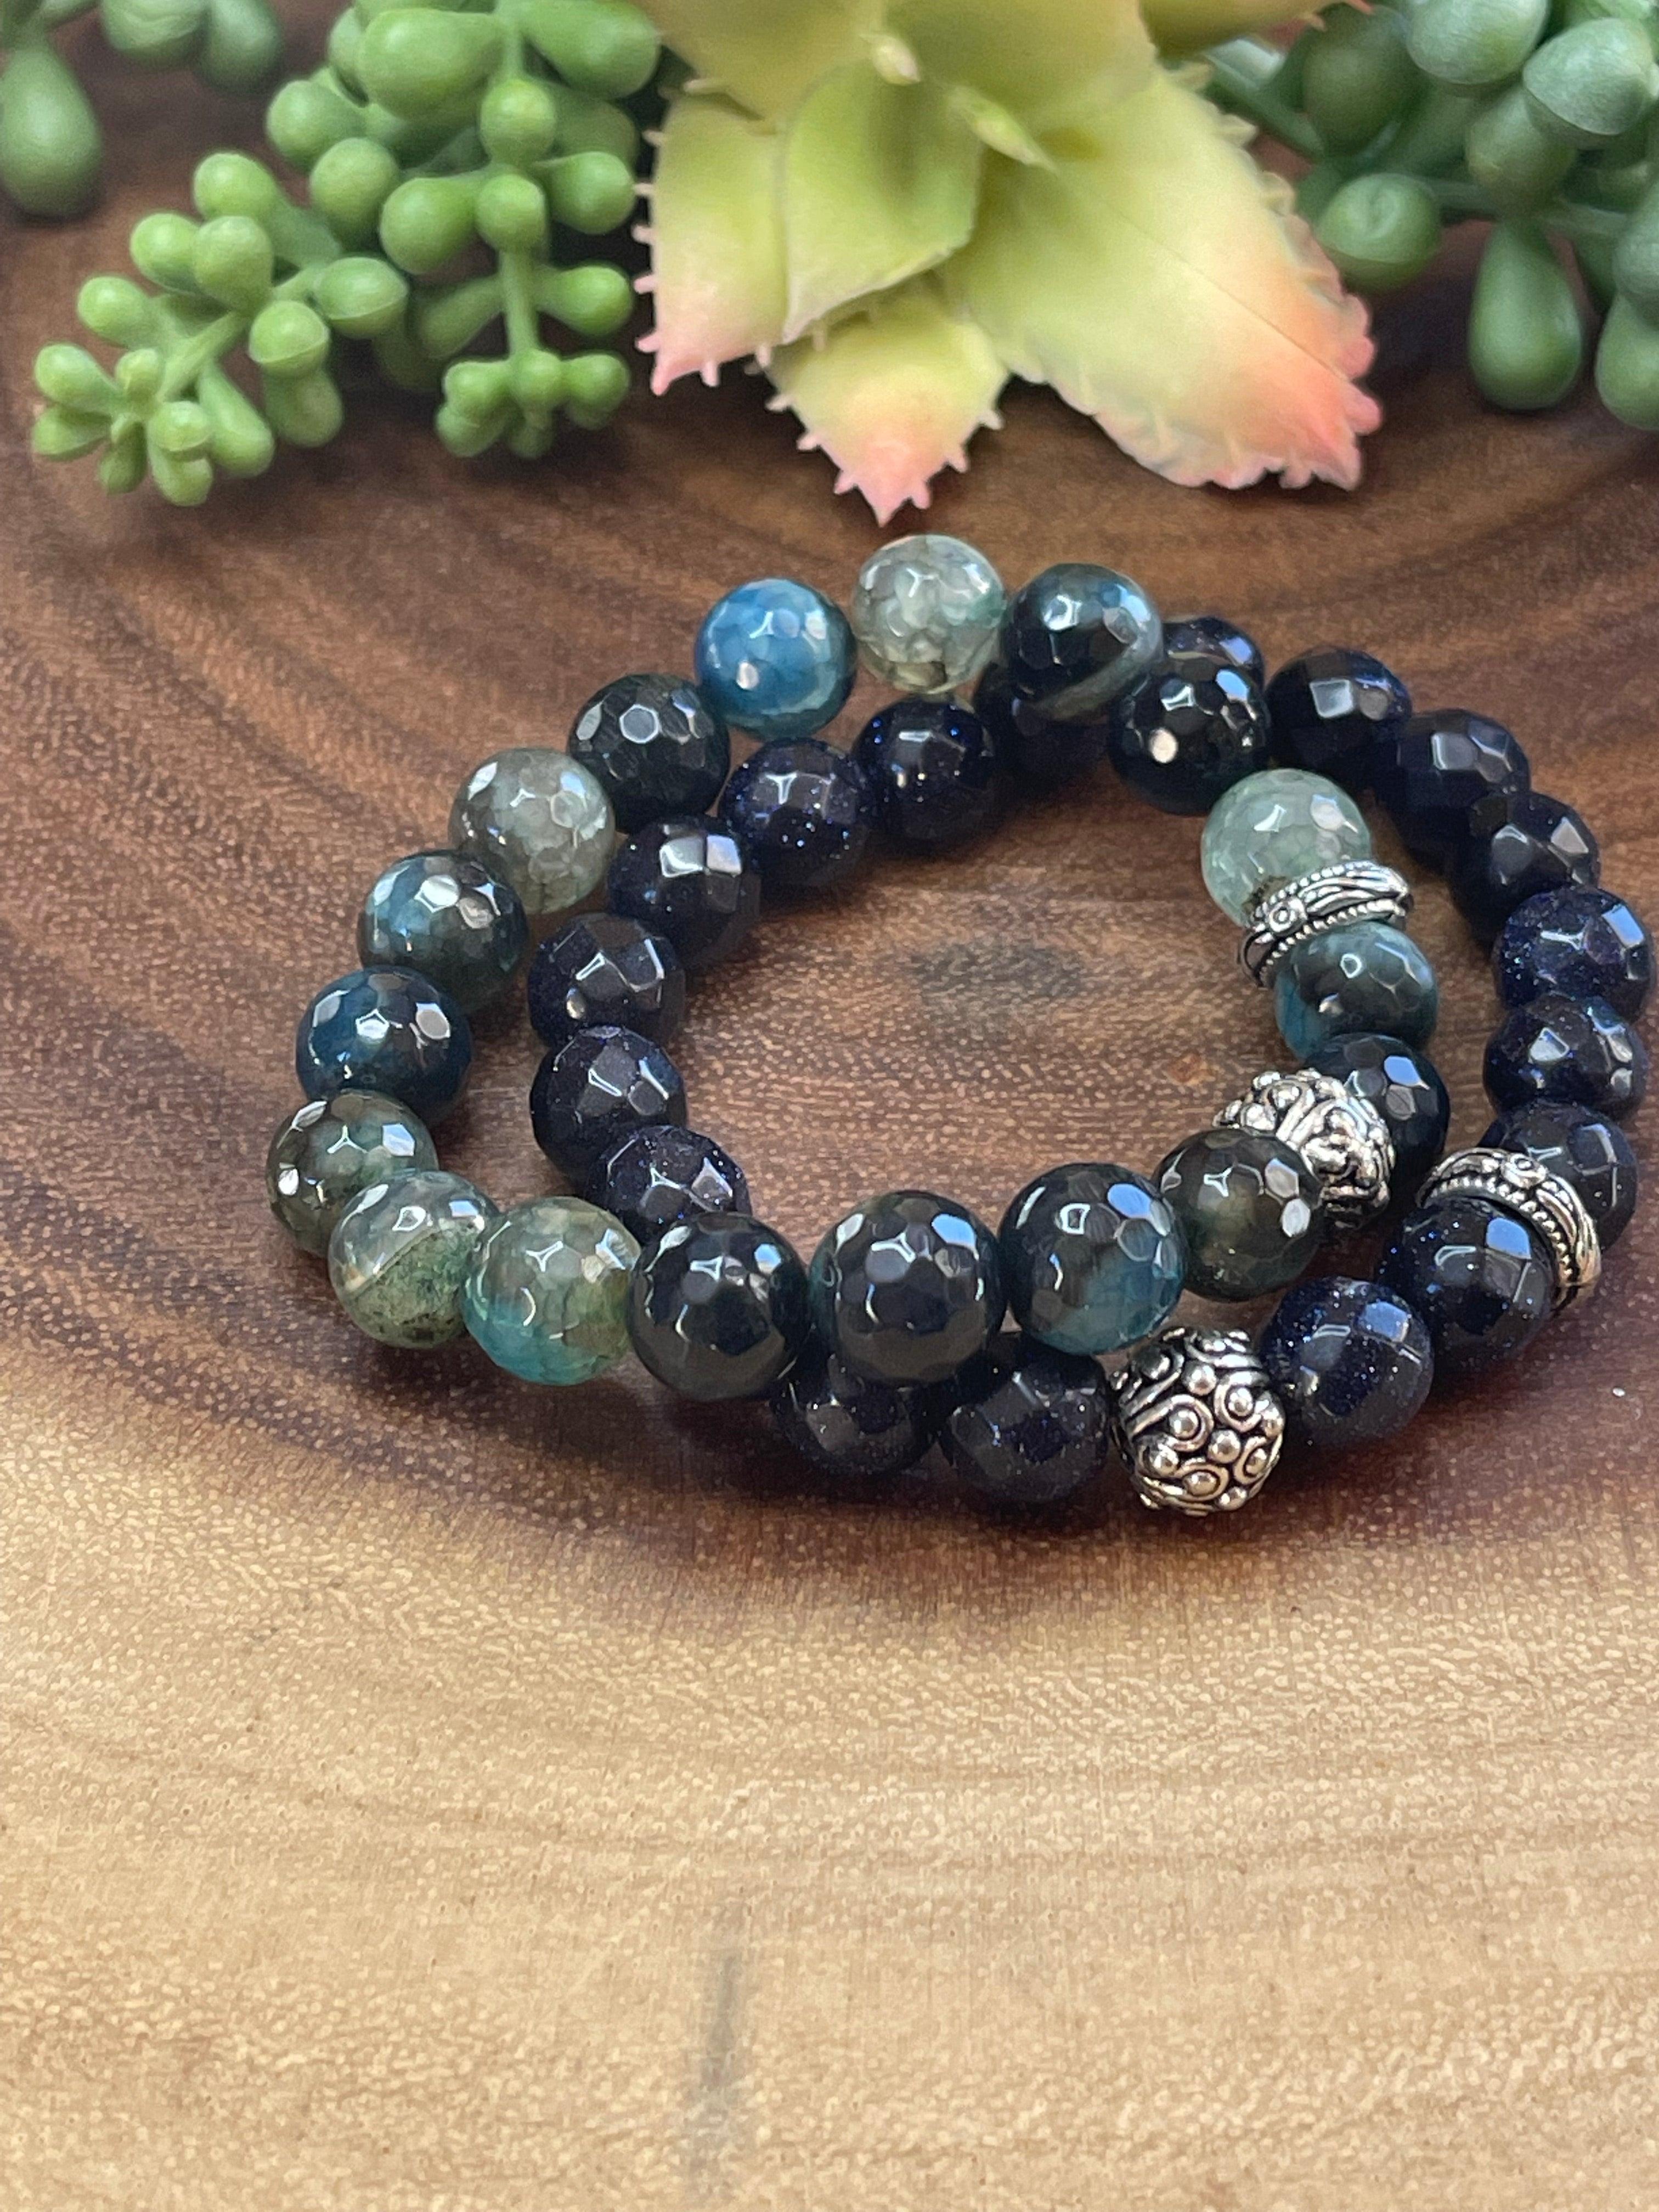 Buy Crystu Natural Moss Agate Bracelet Crystal Stone 10mm Round Bead  Bracelet for Reiki Healing and Crystal Healing Stone (Color : Green) at  Amazon.in